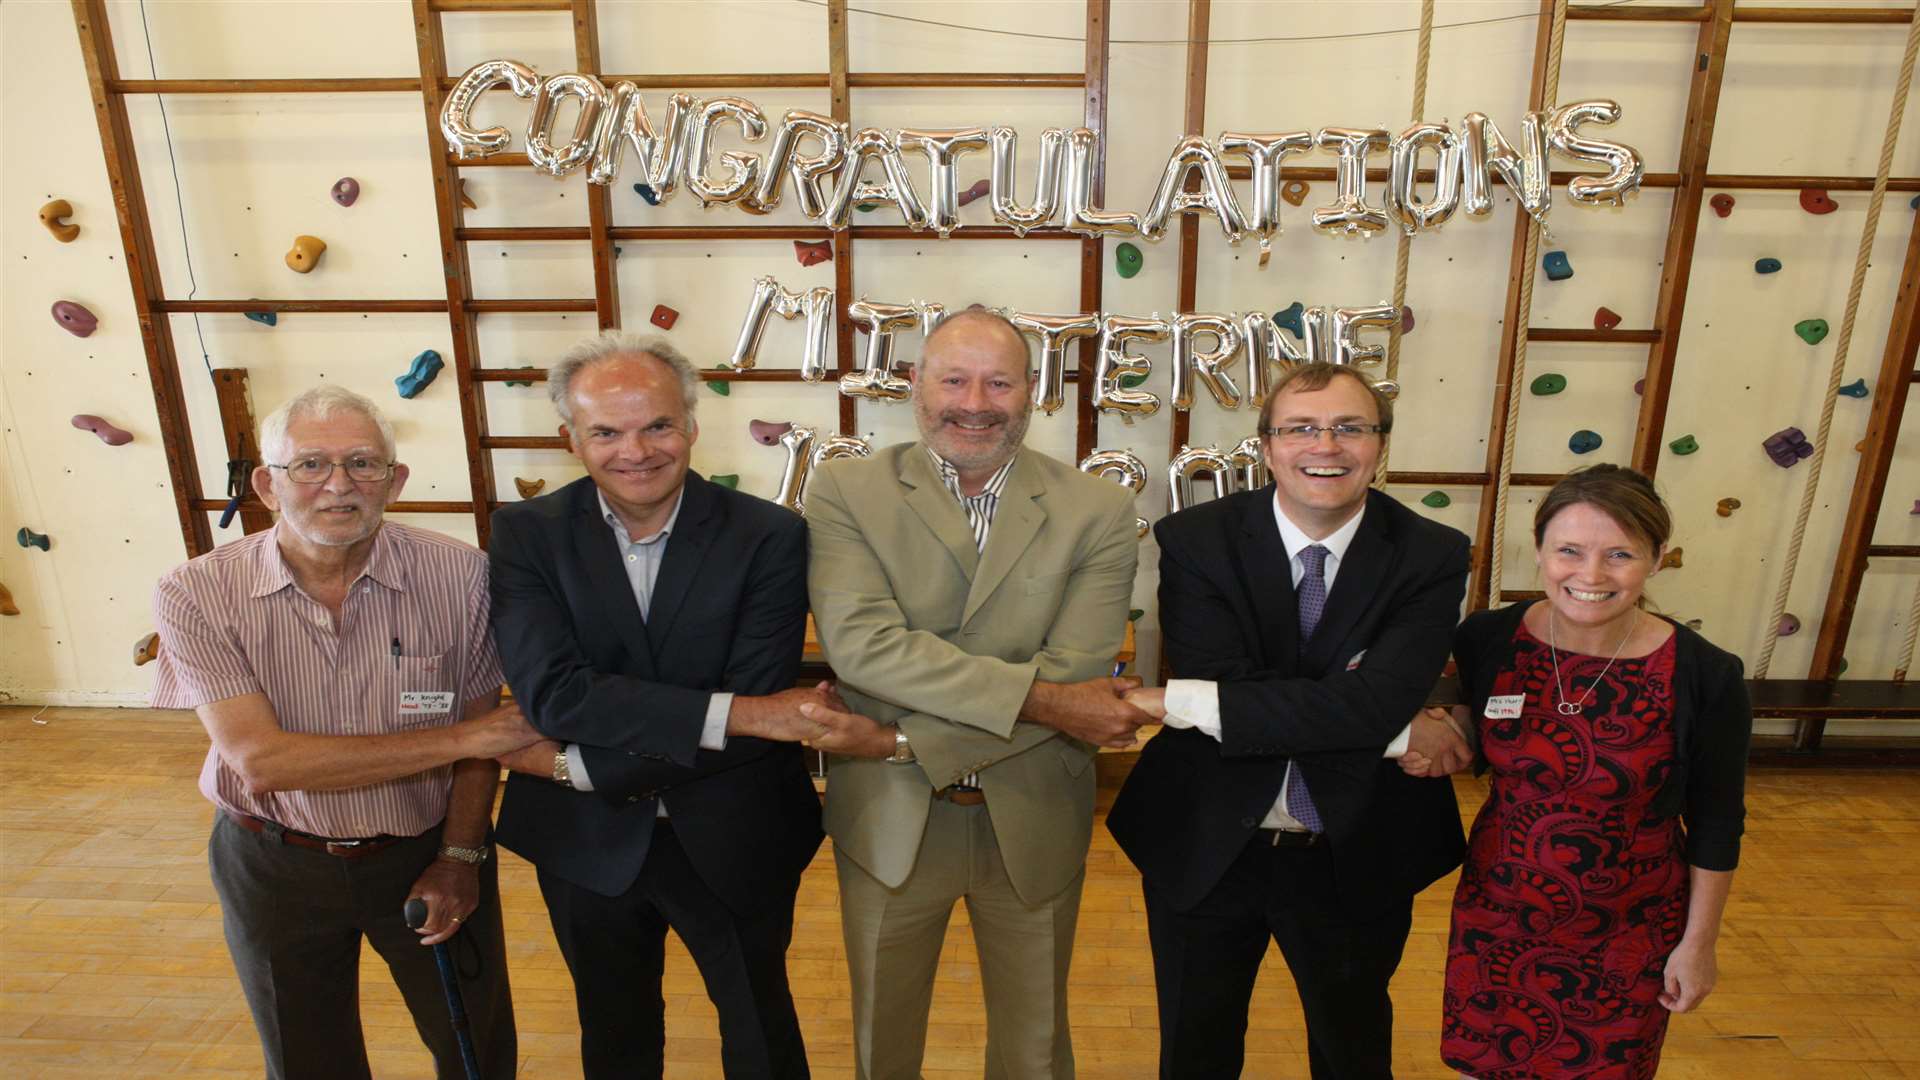 Former Minterne head teachers Derek Knight, Bill McGrory and Jon Day, with current executive head and head of school David Whitehead and Catherine Hurst